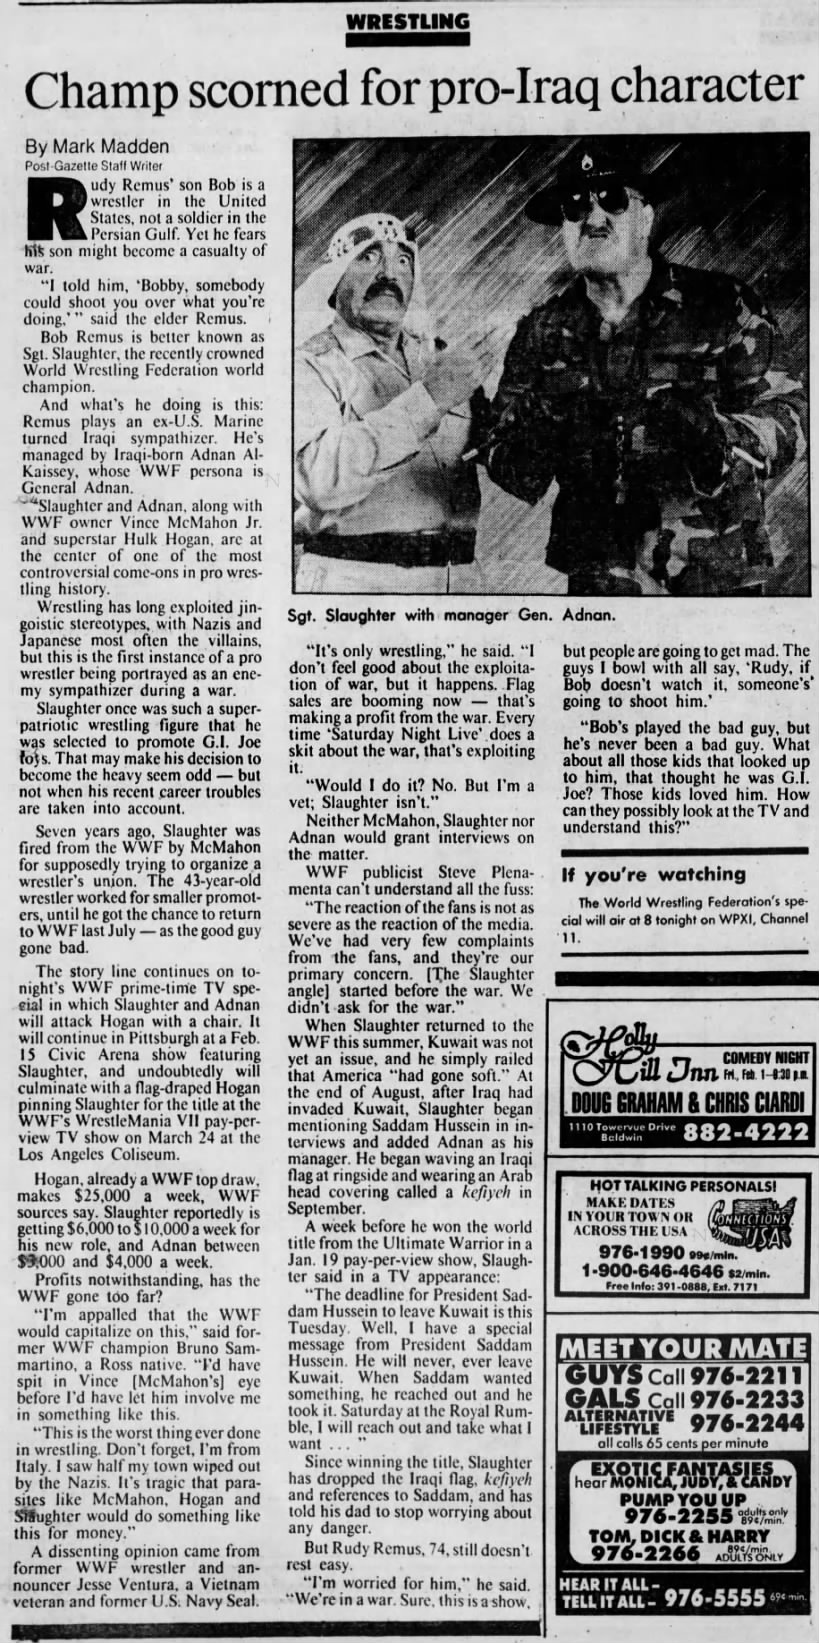 Sgt. Slaughter's dad talks to Mark Madden about Iraq heat (2/1/1991)